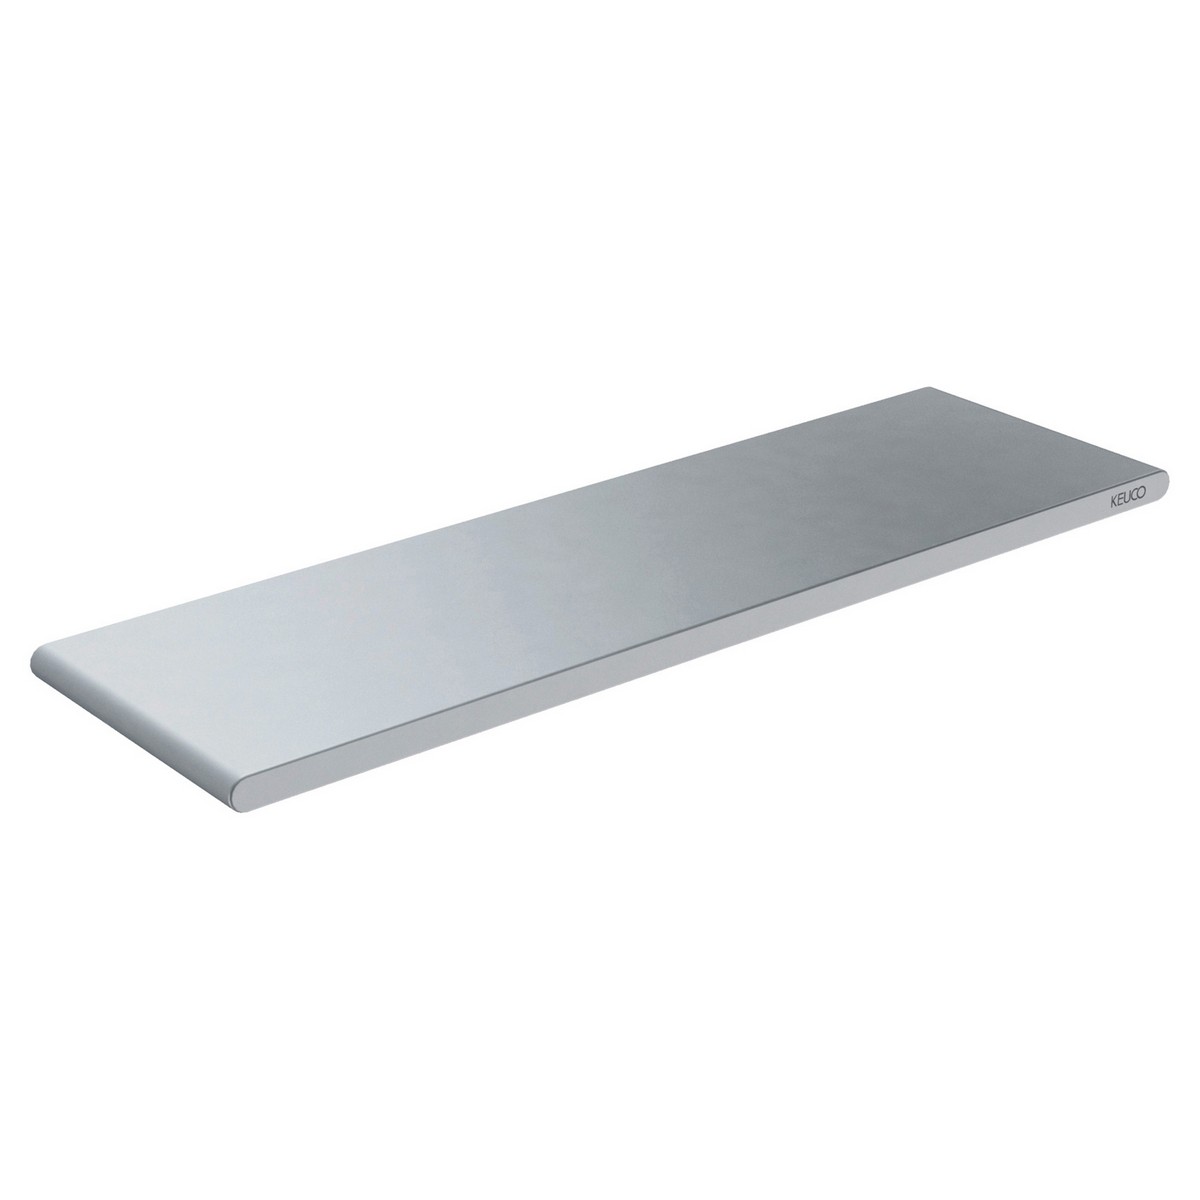 KEUCO 11558170000 EDITION 400 12 7/8 INCH WALL MOUNTED SHOWER SHELF IN ALUMINUM